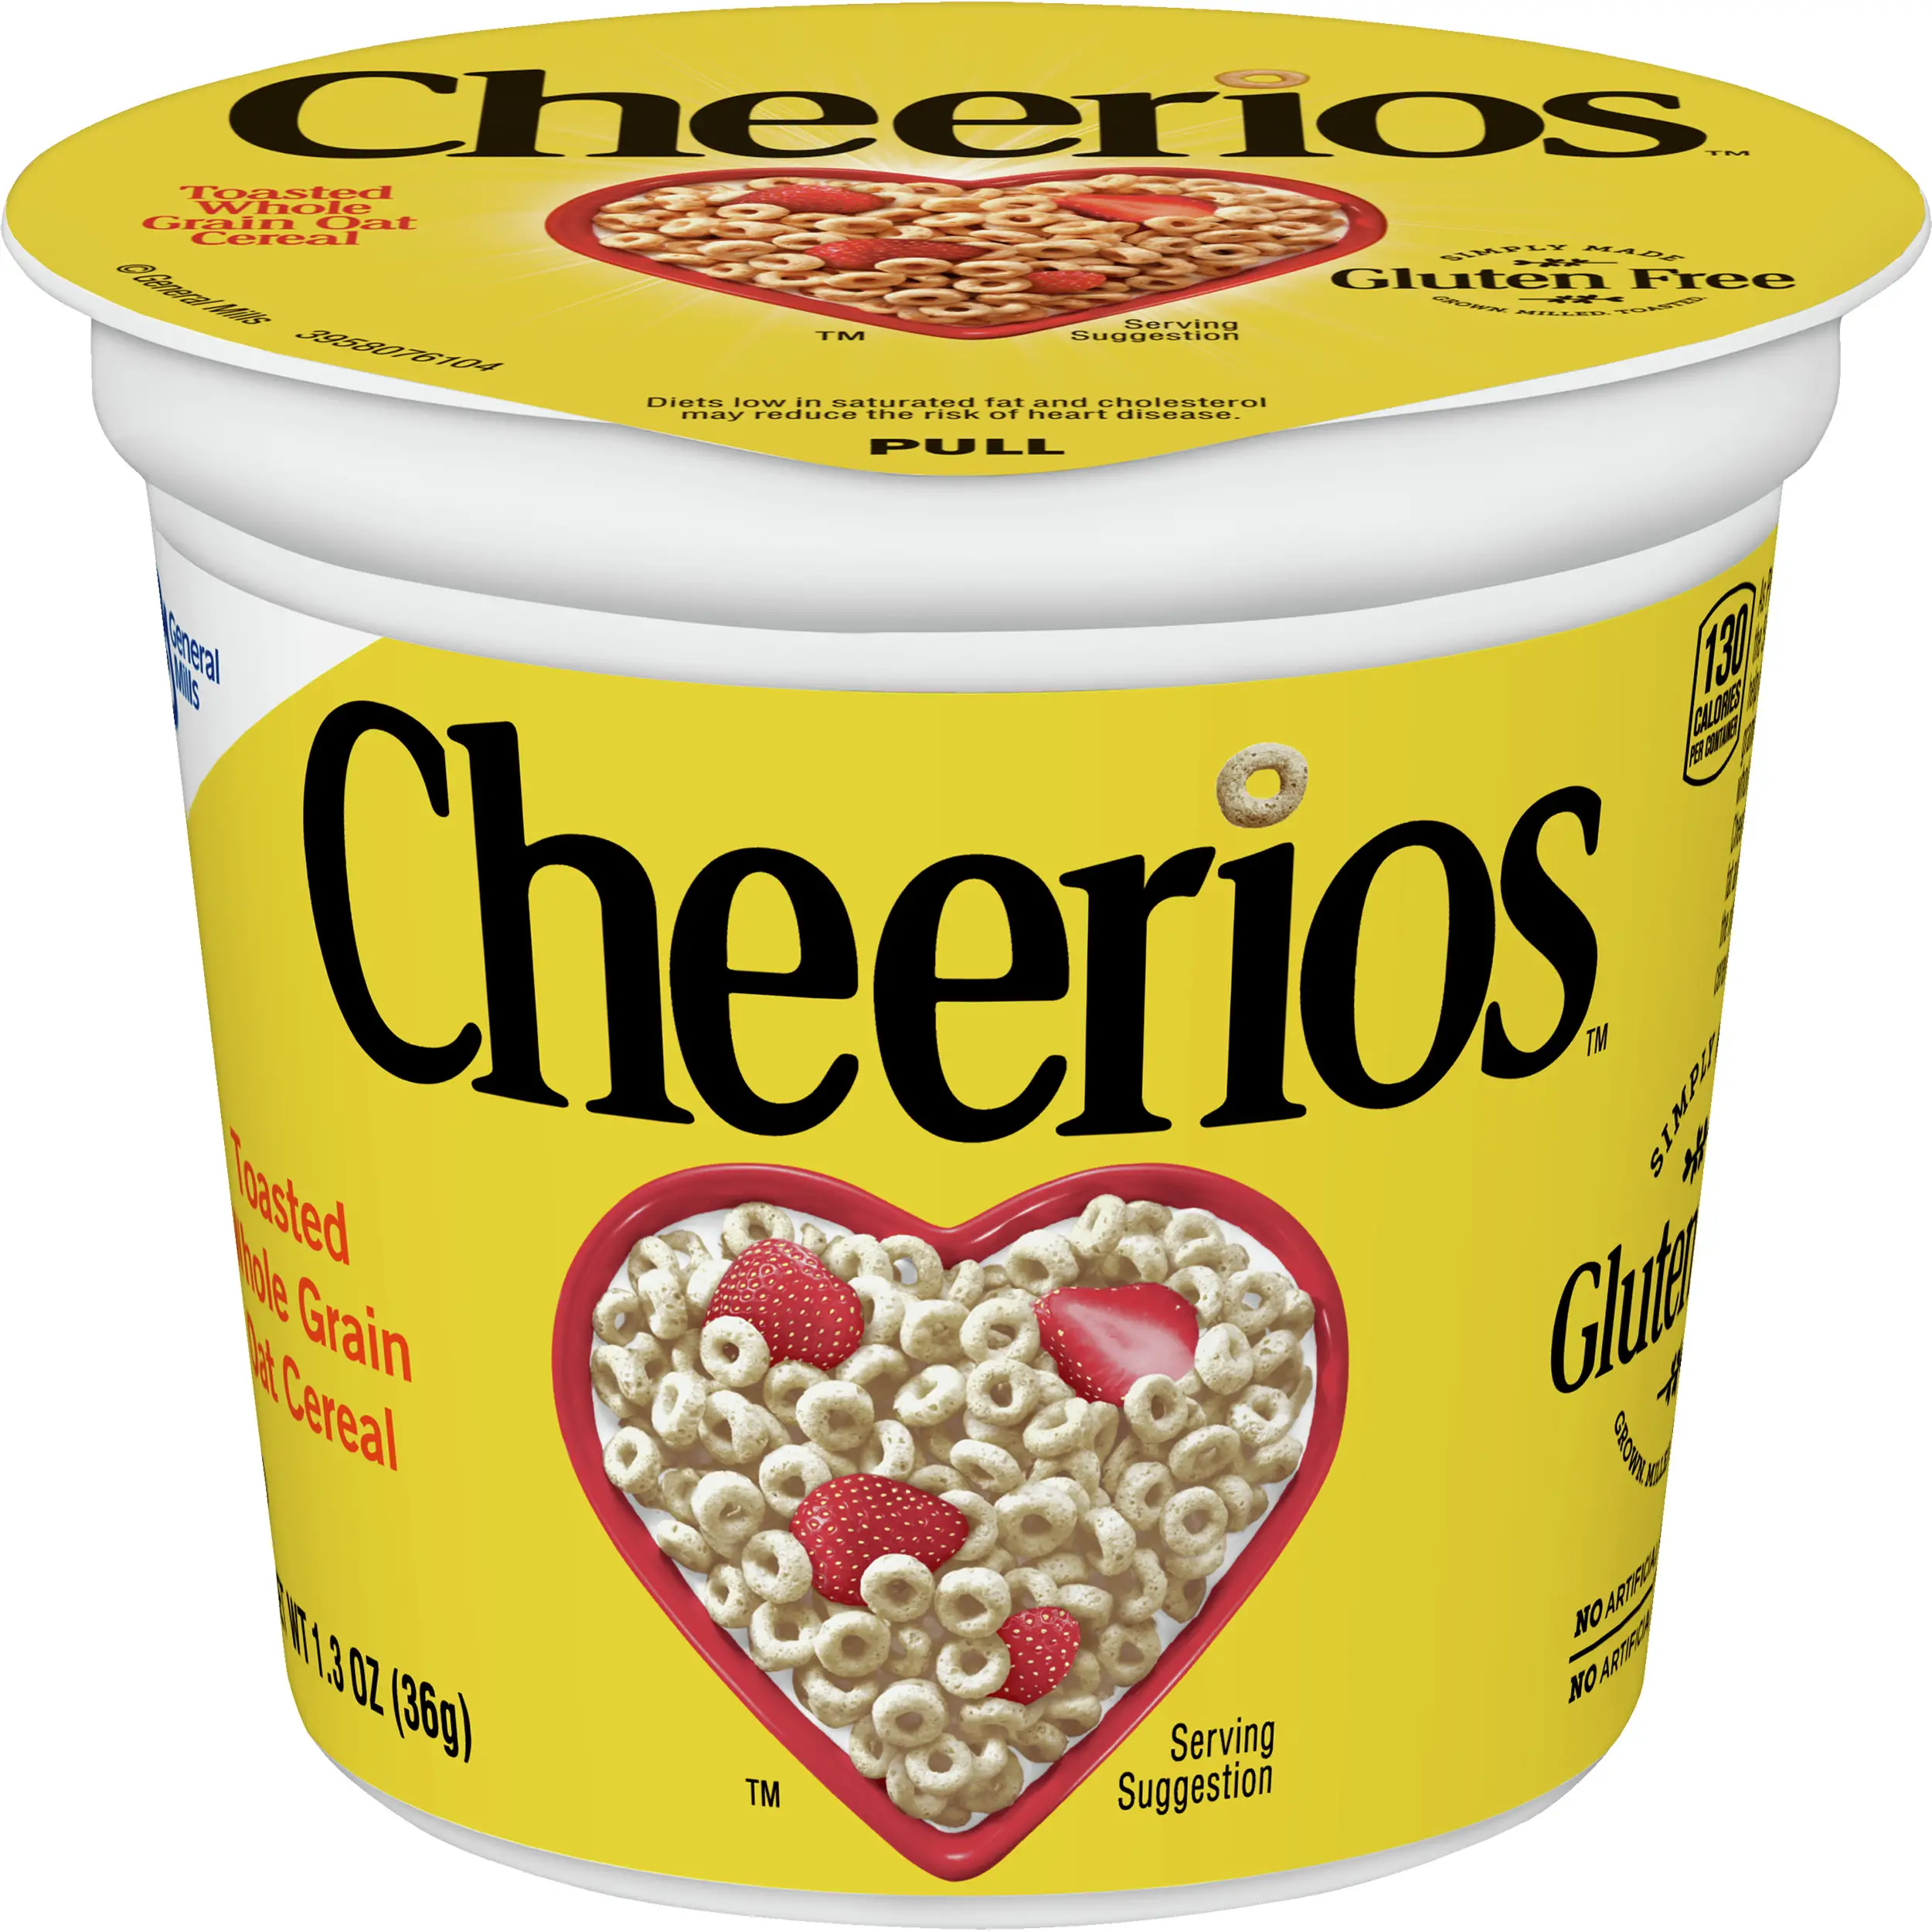 Cheerios Cups Gluten Free Cereal Whole Grain Oats 1.3 oz